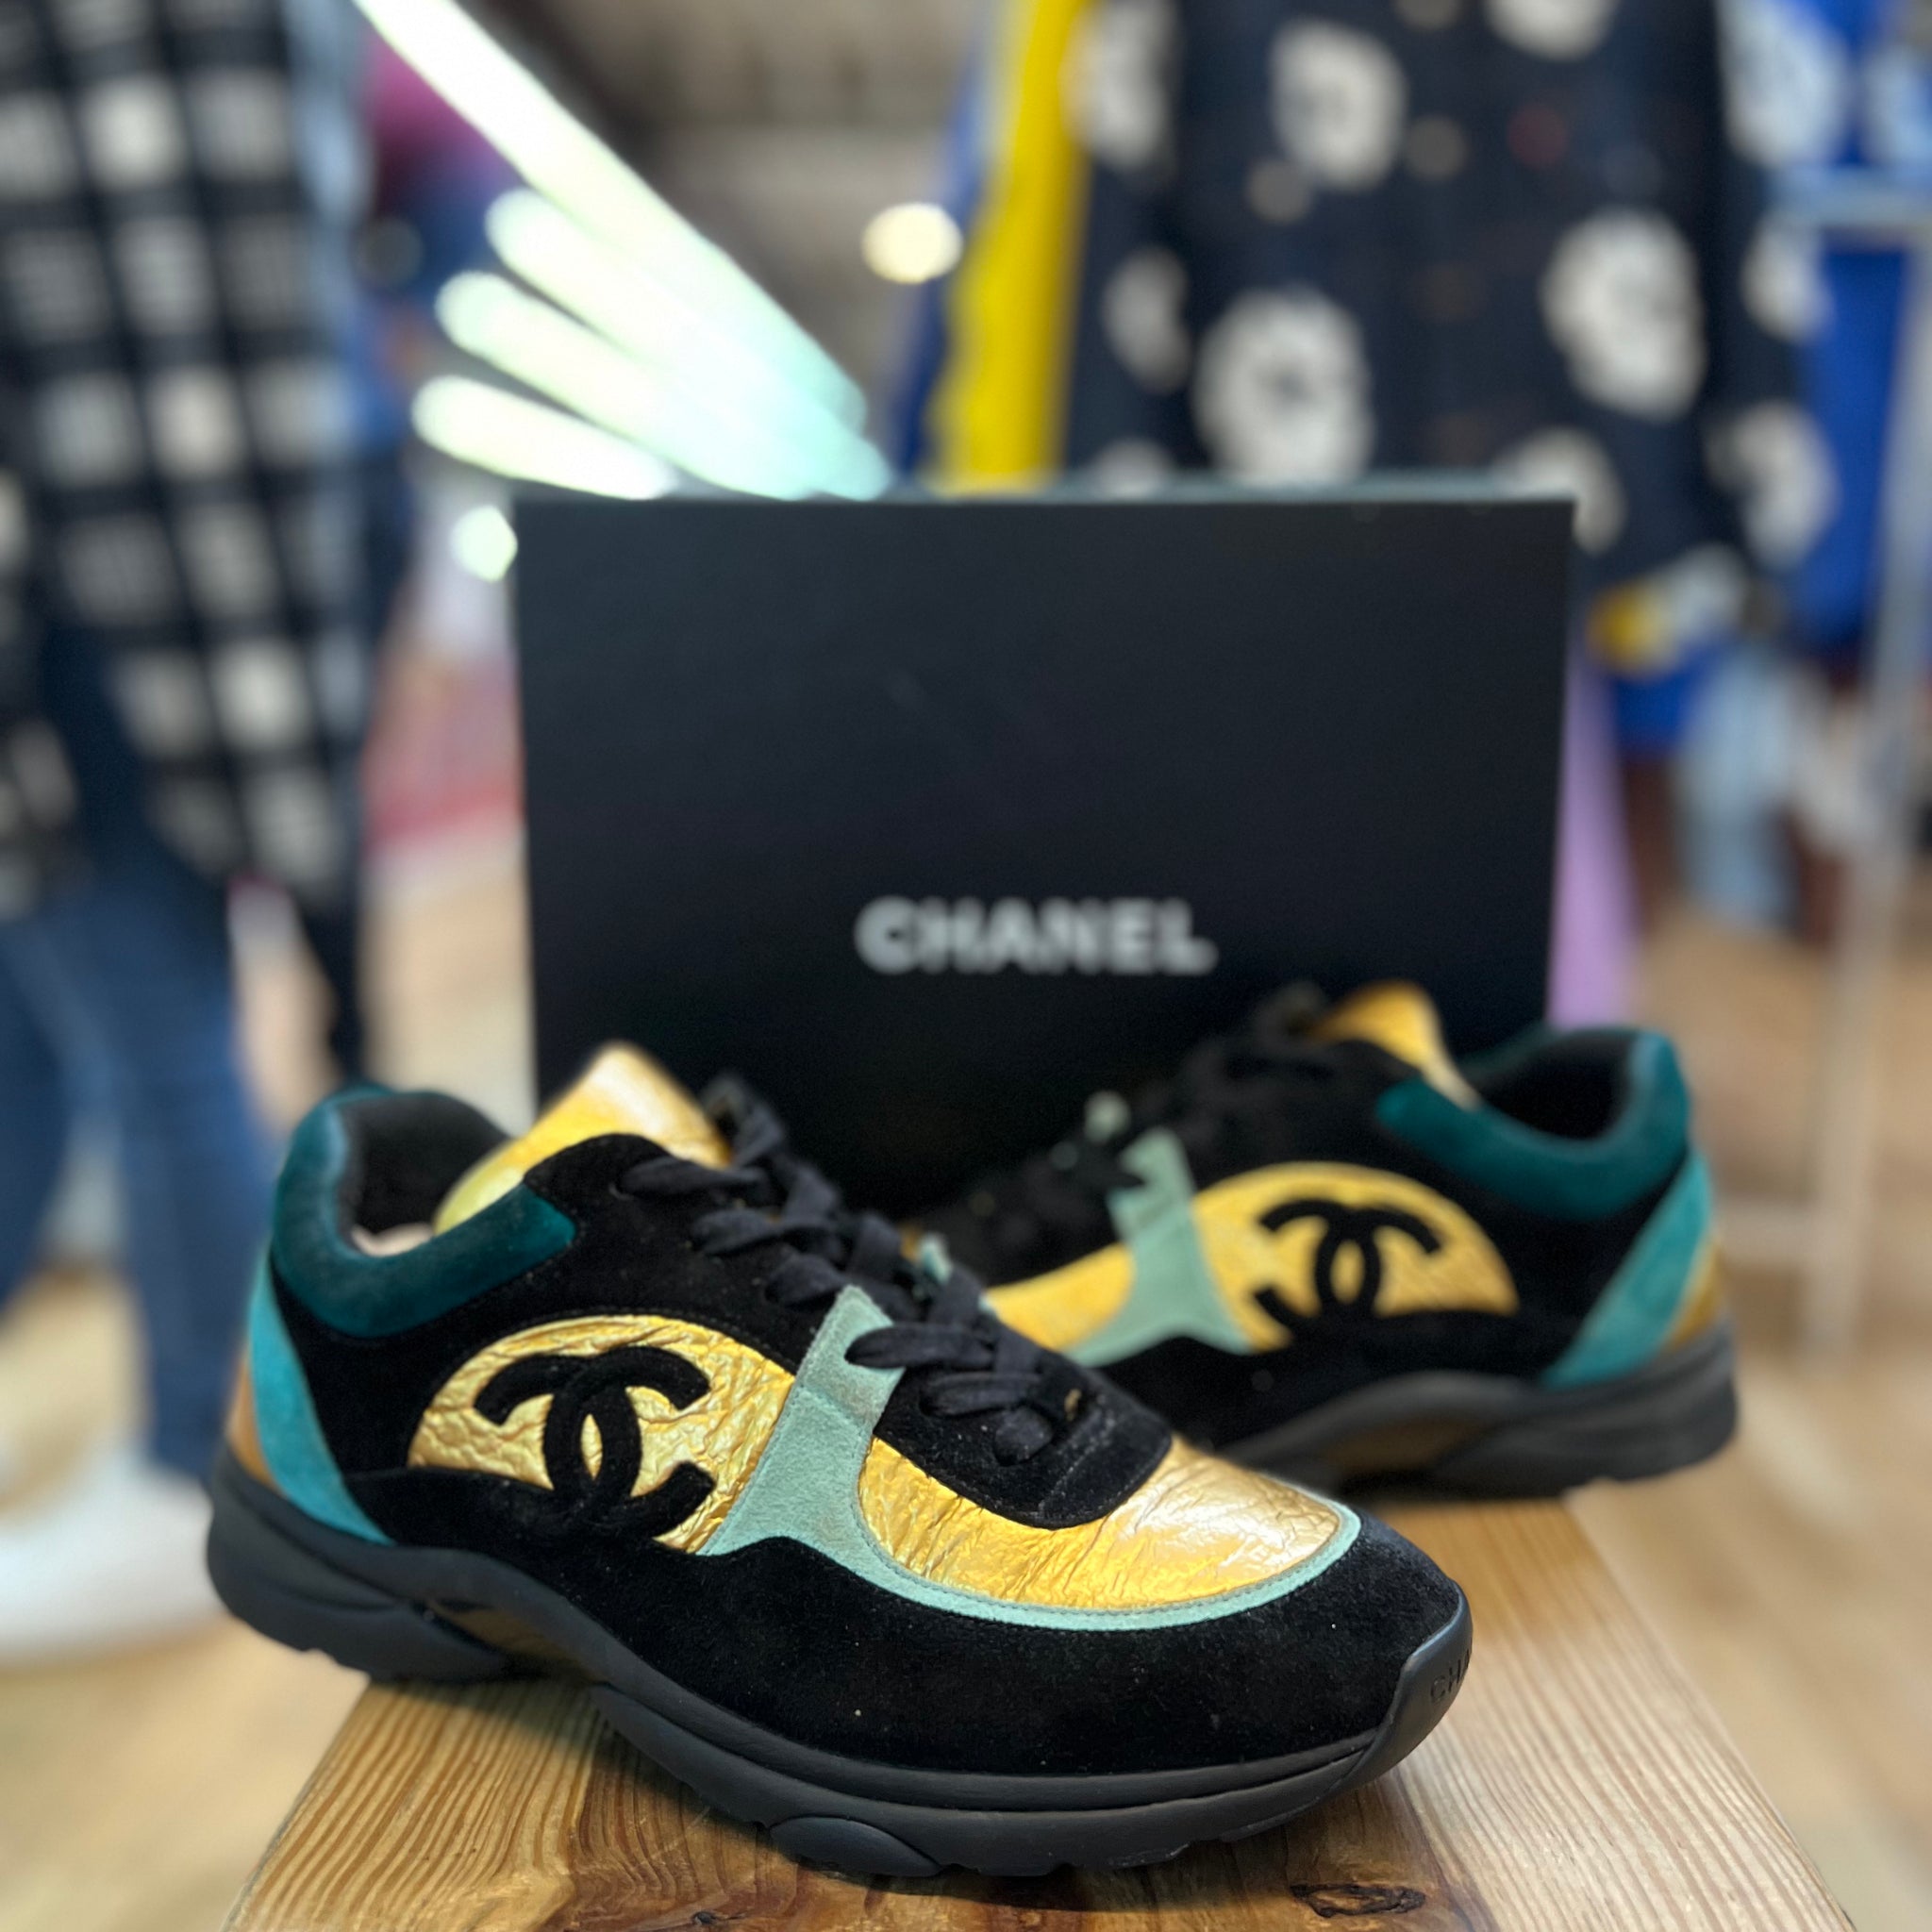 Chanel Calfskin Trainer "Black/Gold" (pre-owned)